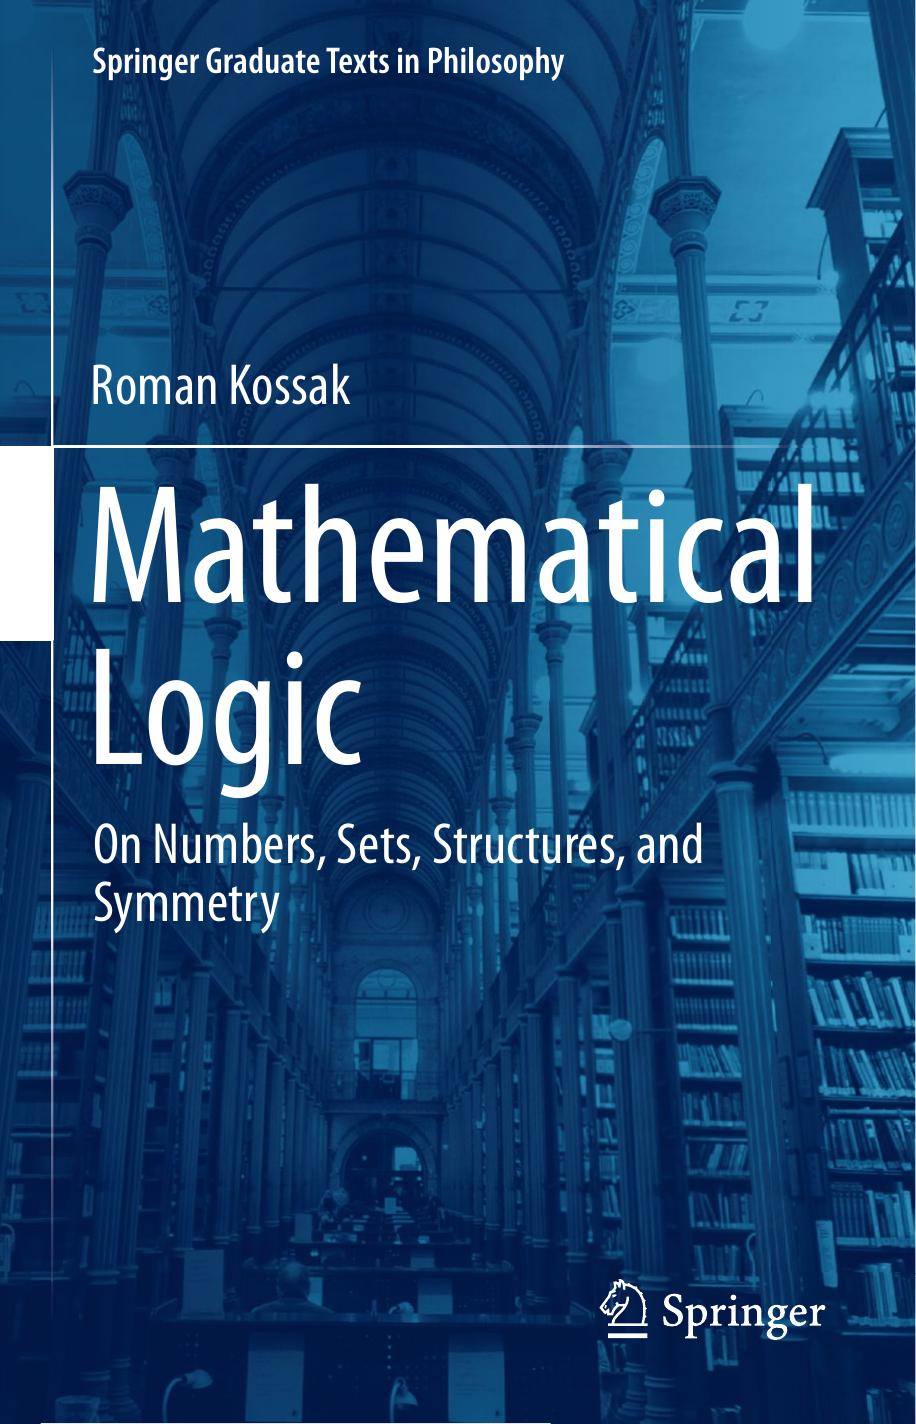 Mathematical Logic  On Numbers, Sets, Structures, and Symmetry 2018.pdf